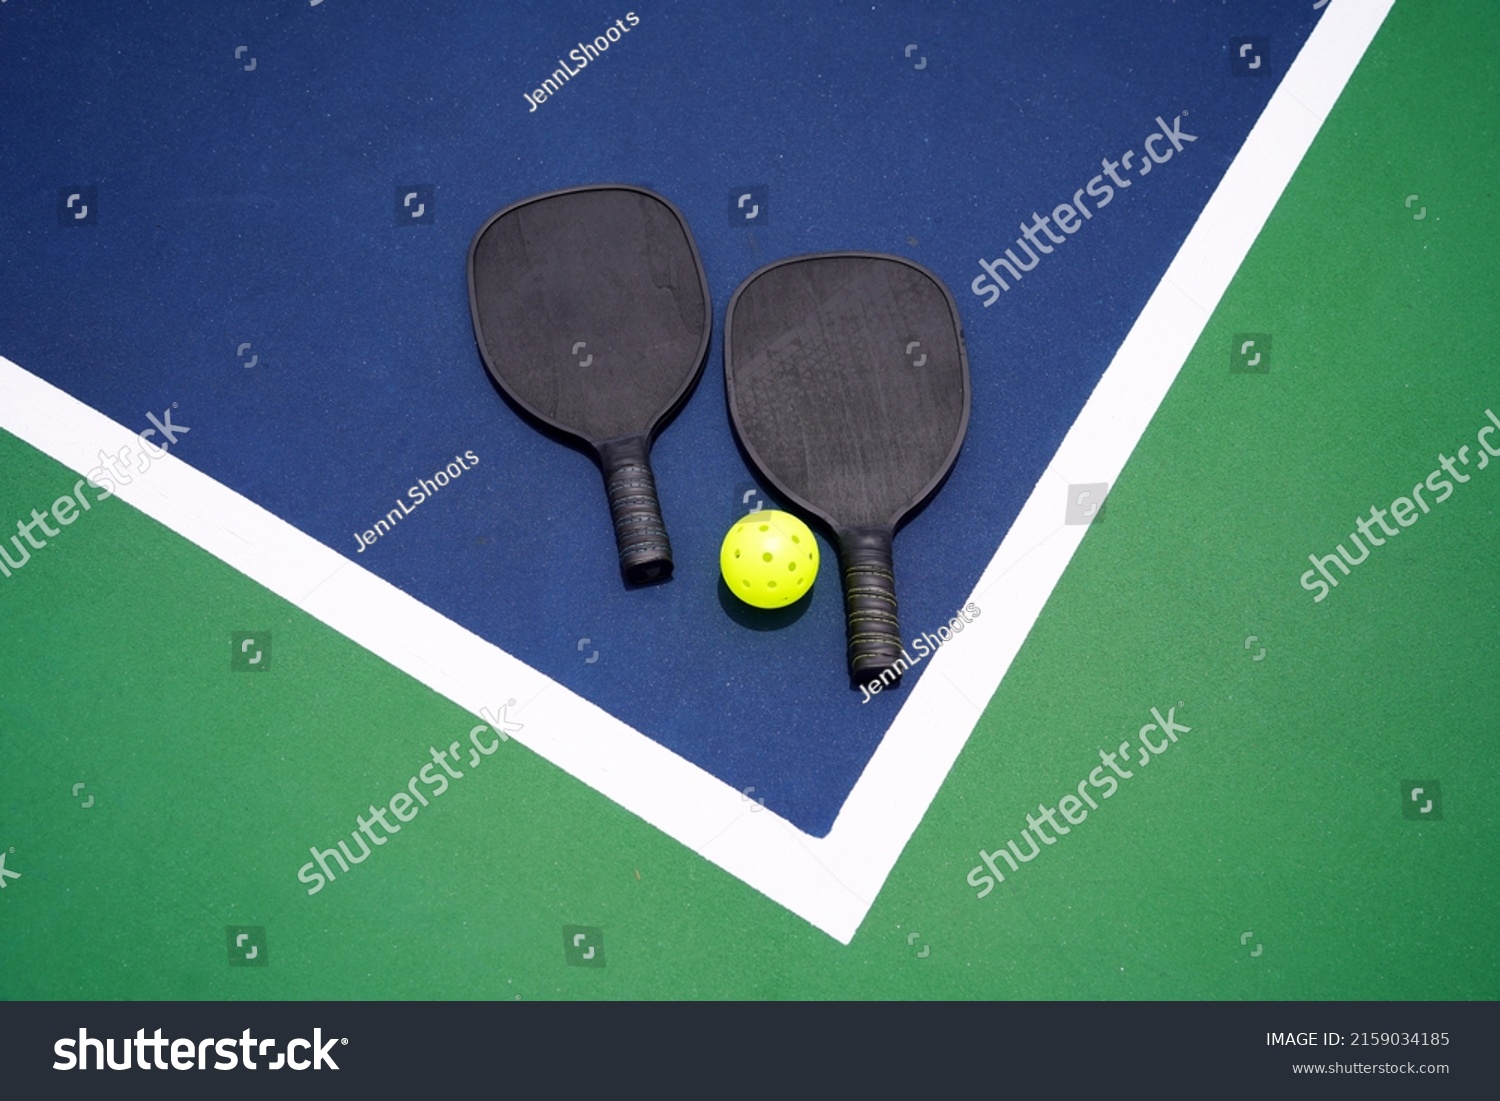 Two pickle ball paddles with a pickle ball on court.                           #2159034185